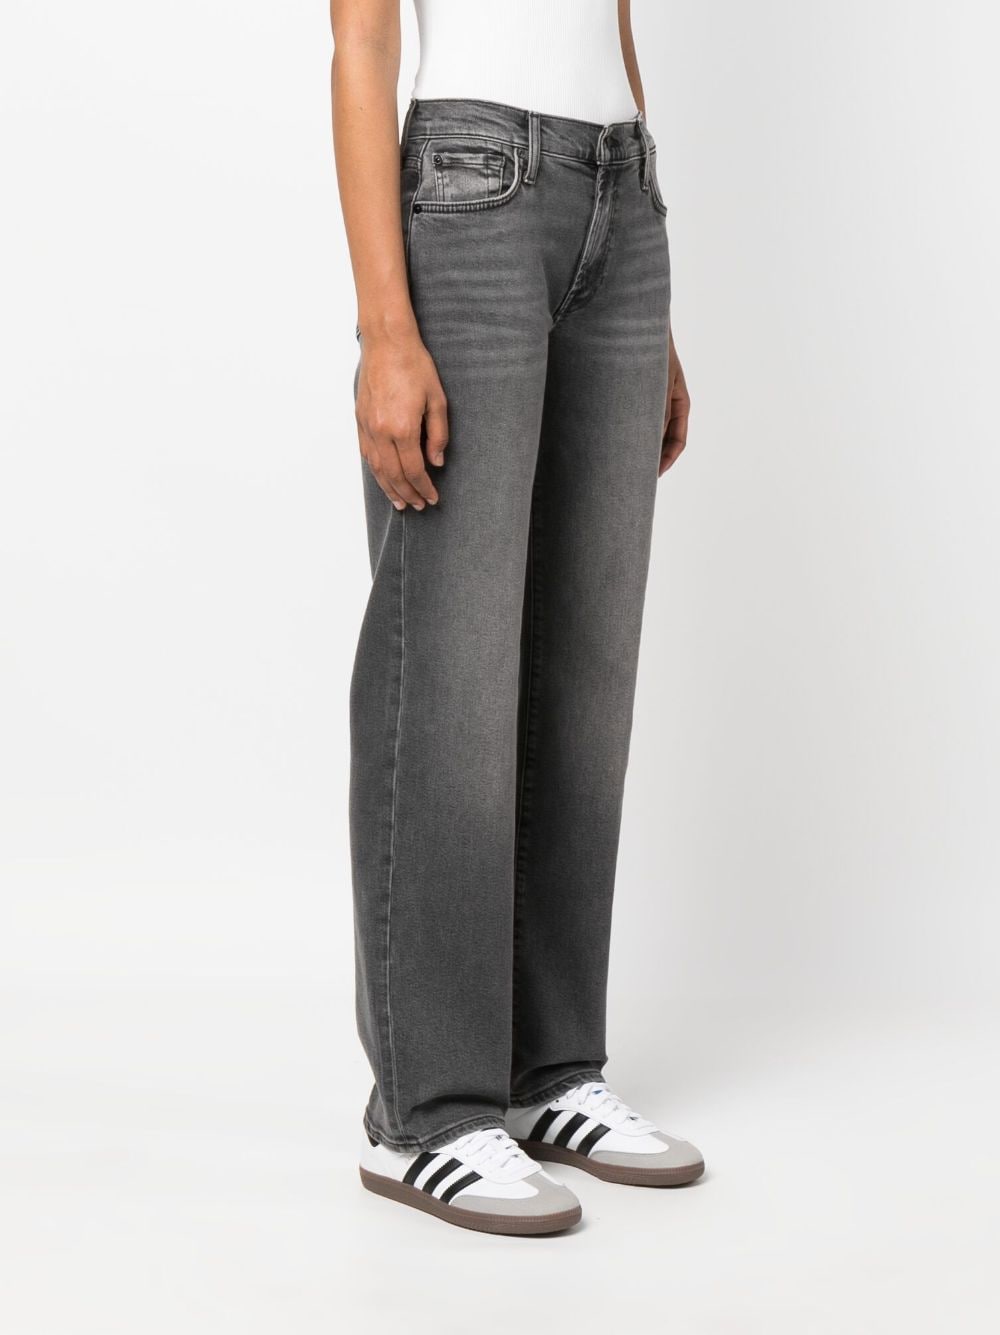 7 For All Mankind 7 FOR ALL MANKIND- Ellie Straight Leg Denim Jeans